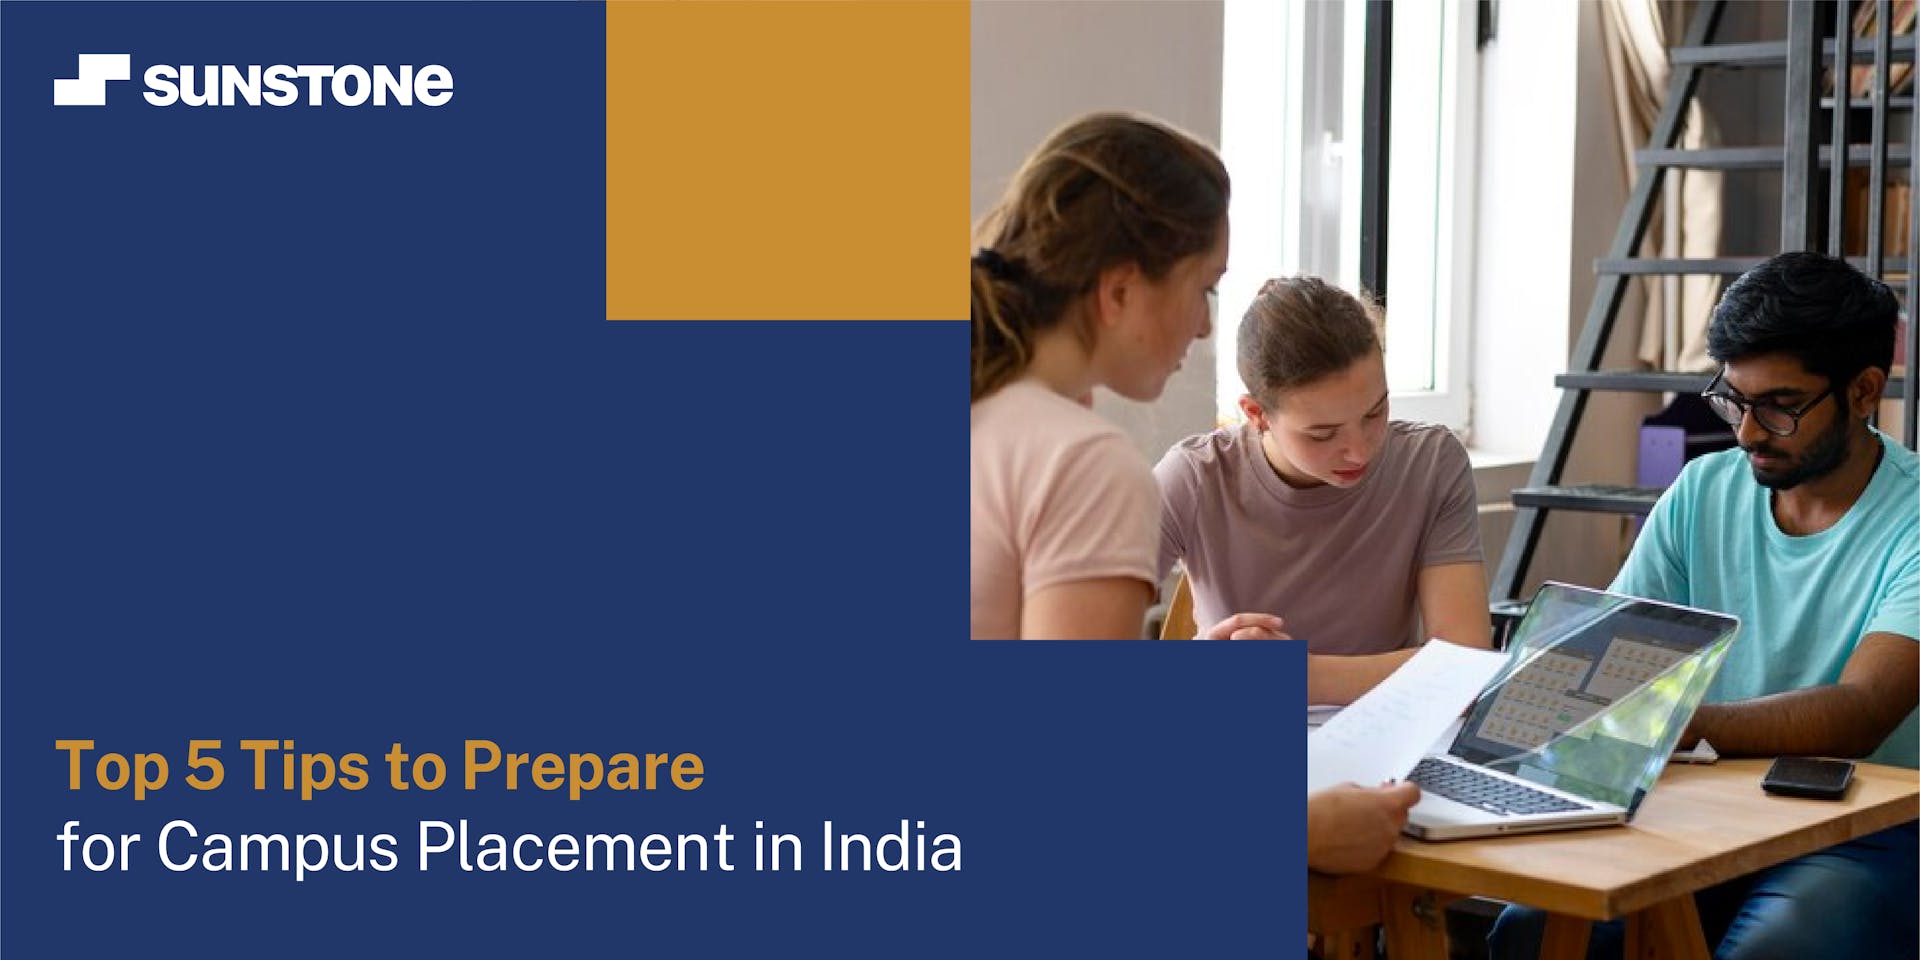 Top 5 Tips to Prepare for Campus Placement in India